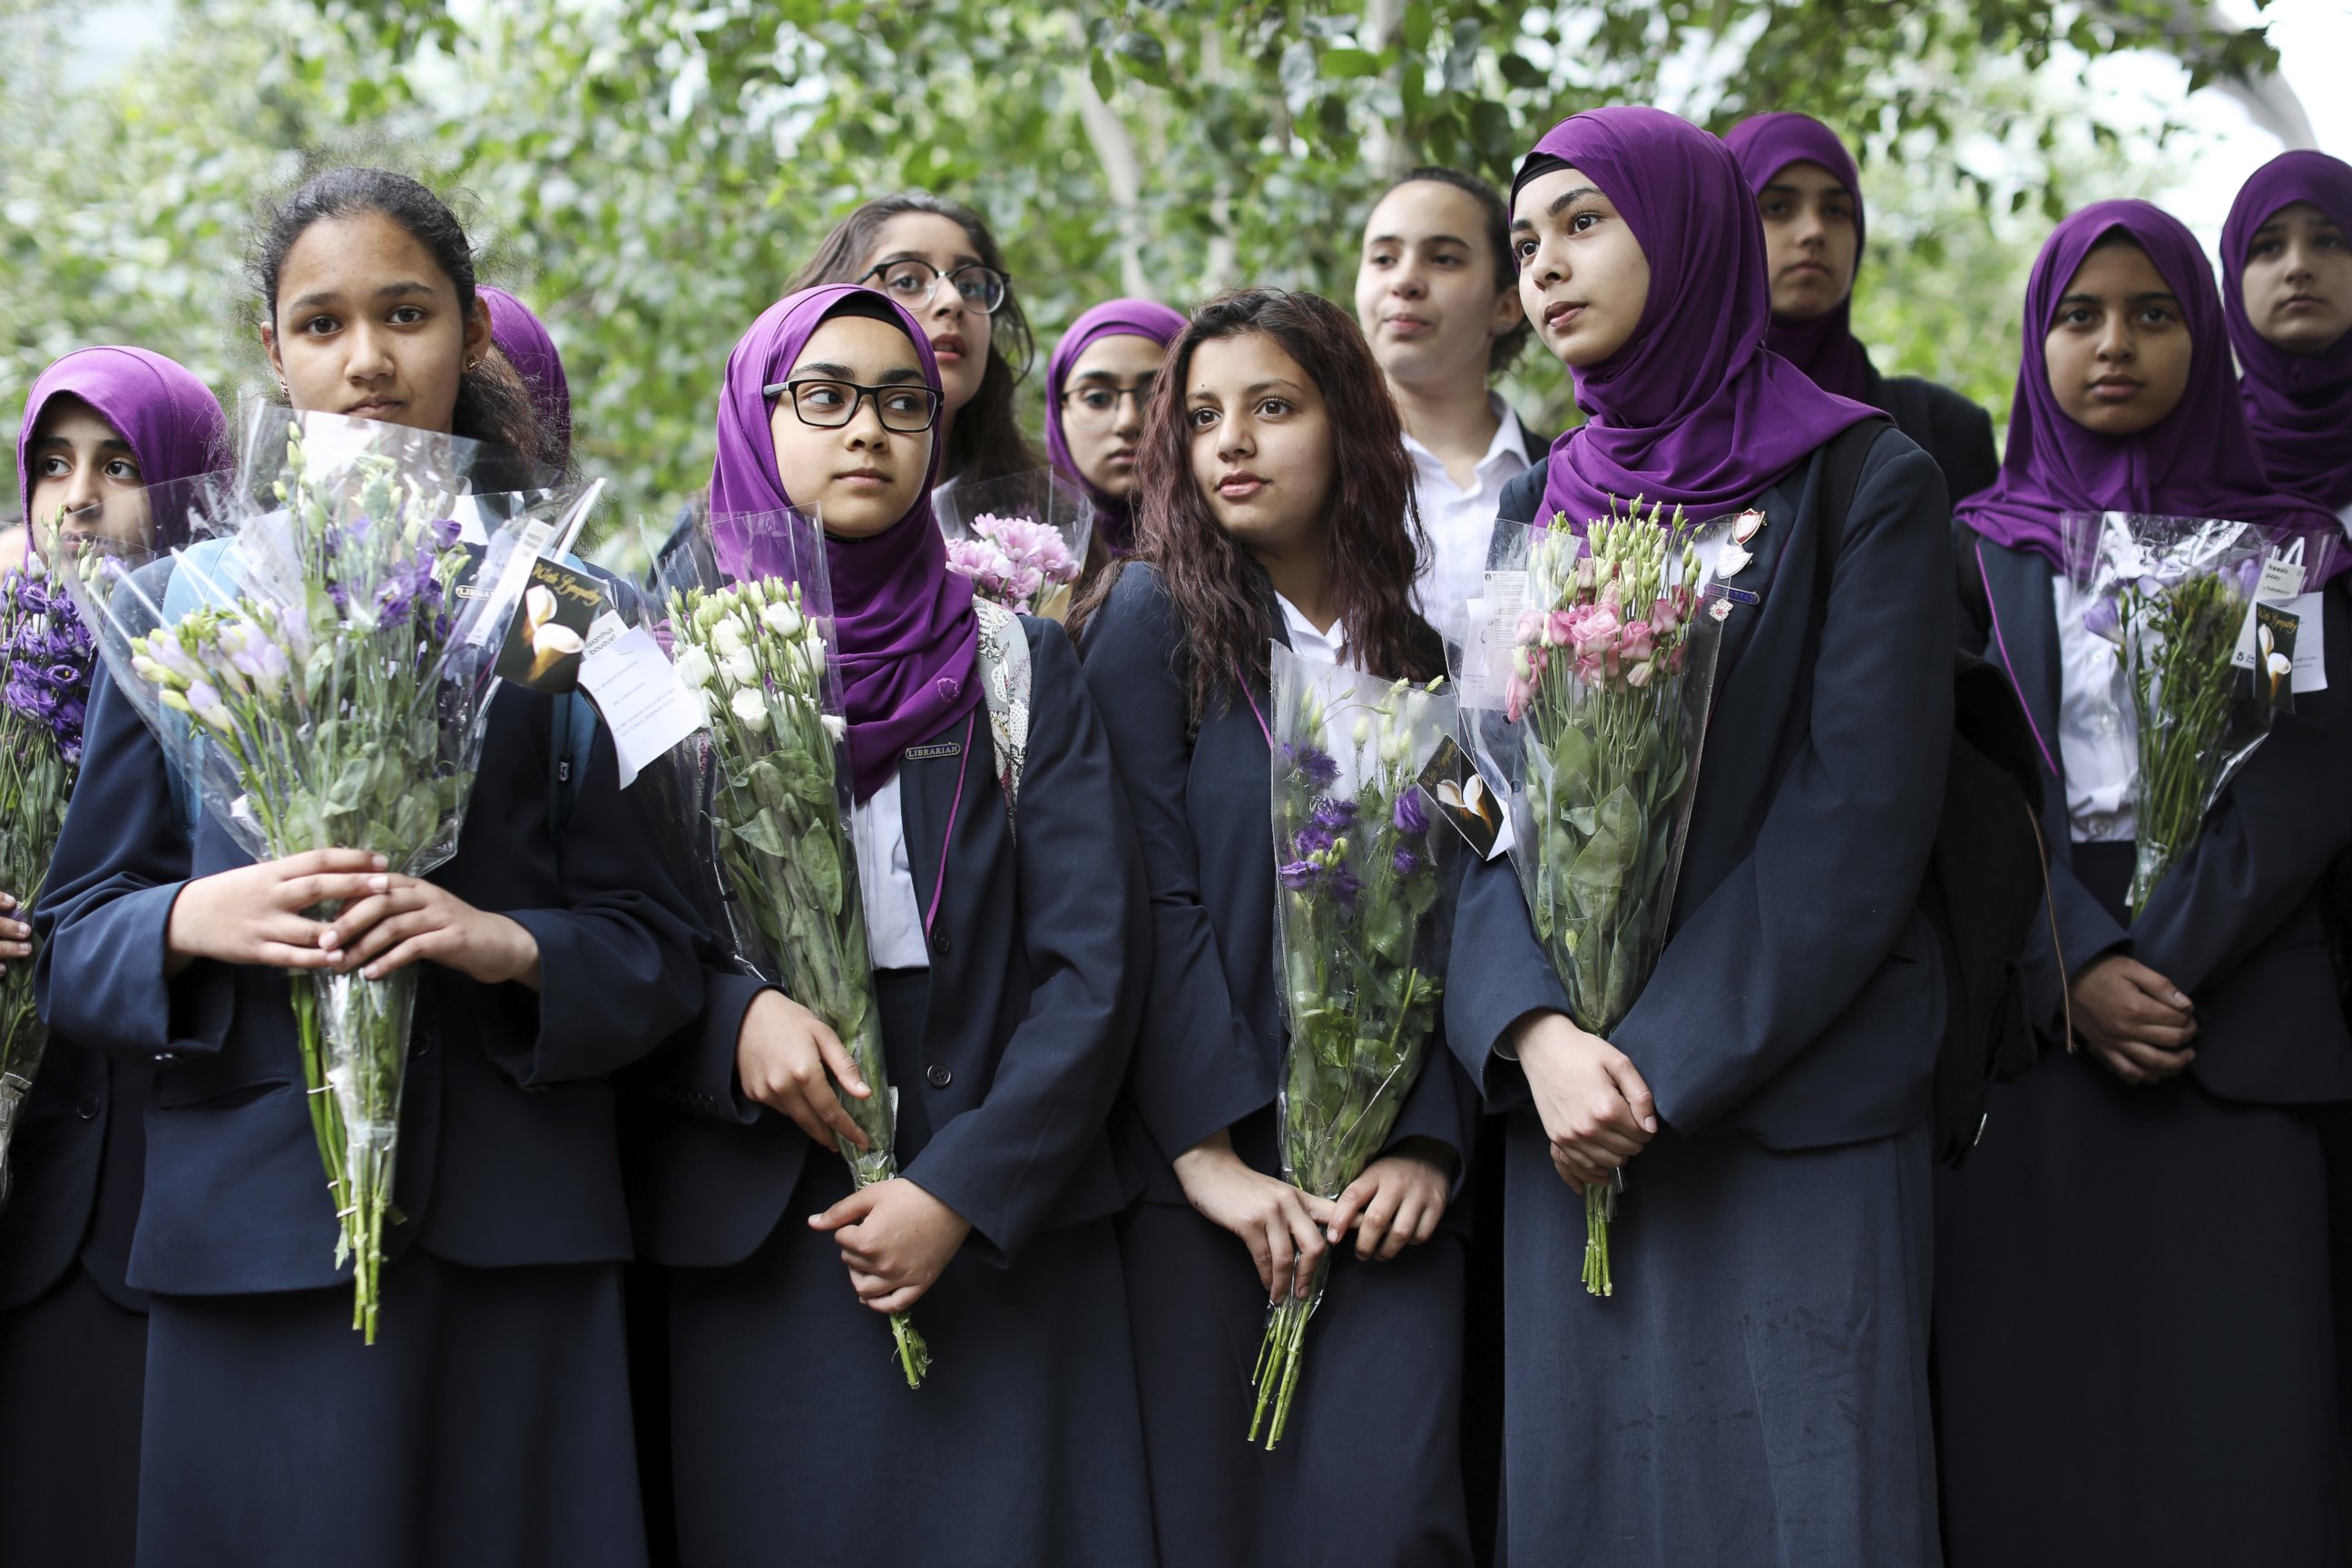 PHOTO: Pupils from Eden Girls' School in Waltham Forest take part in a vigil in memory of those killed in the recent terror attacks in London, in Potters Fields Park, June 5, 2017, in London, England. 